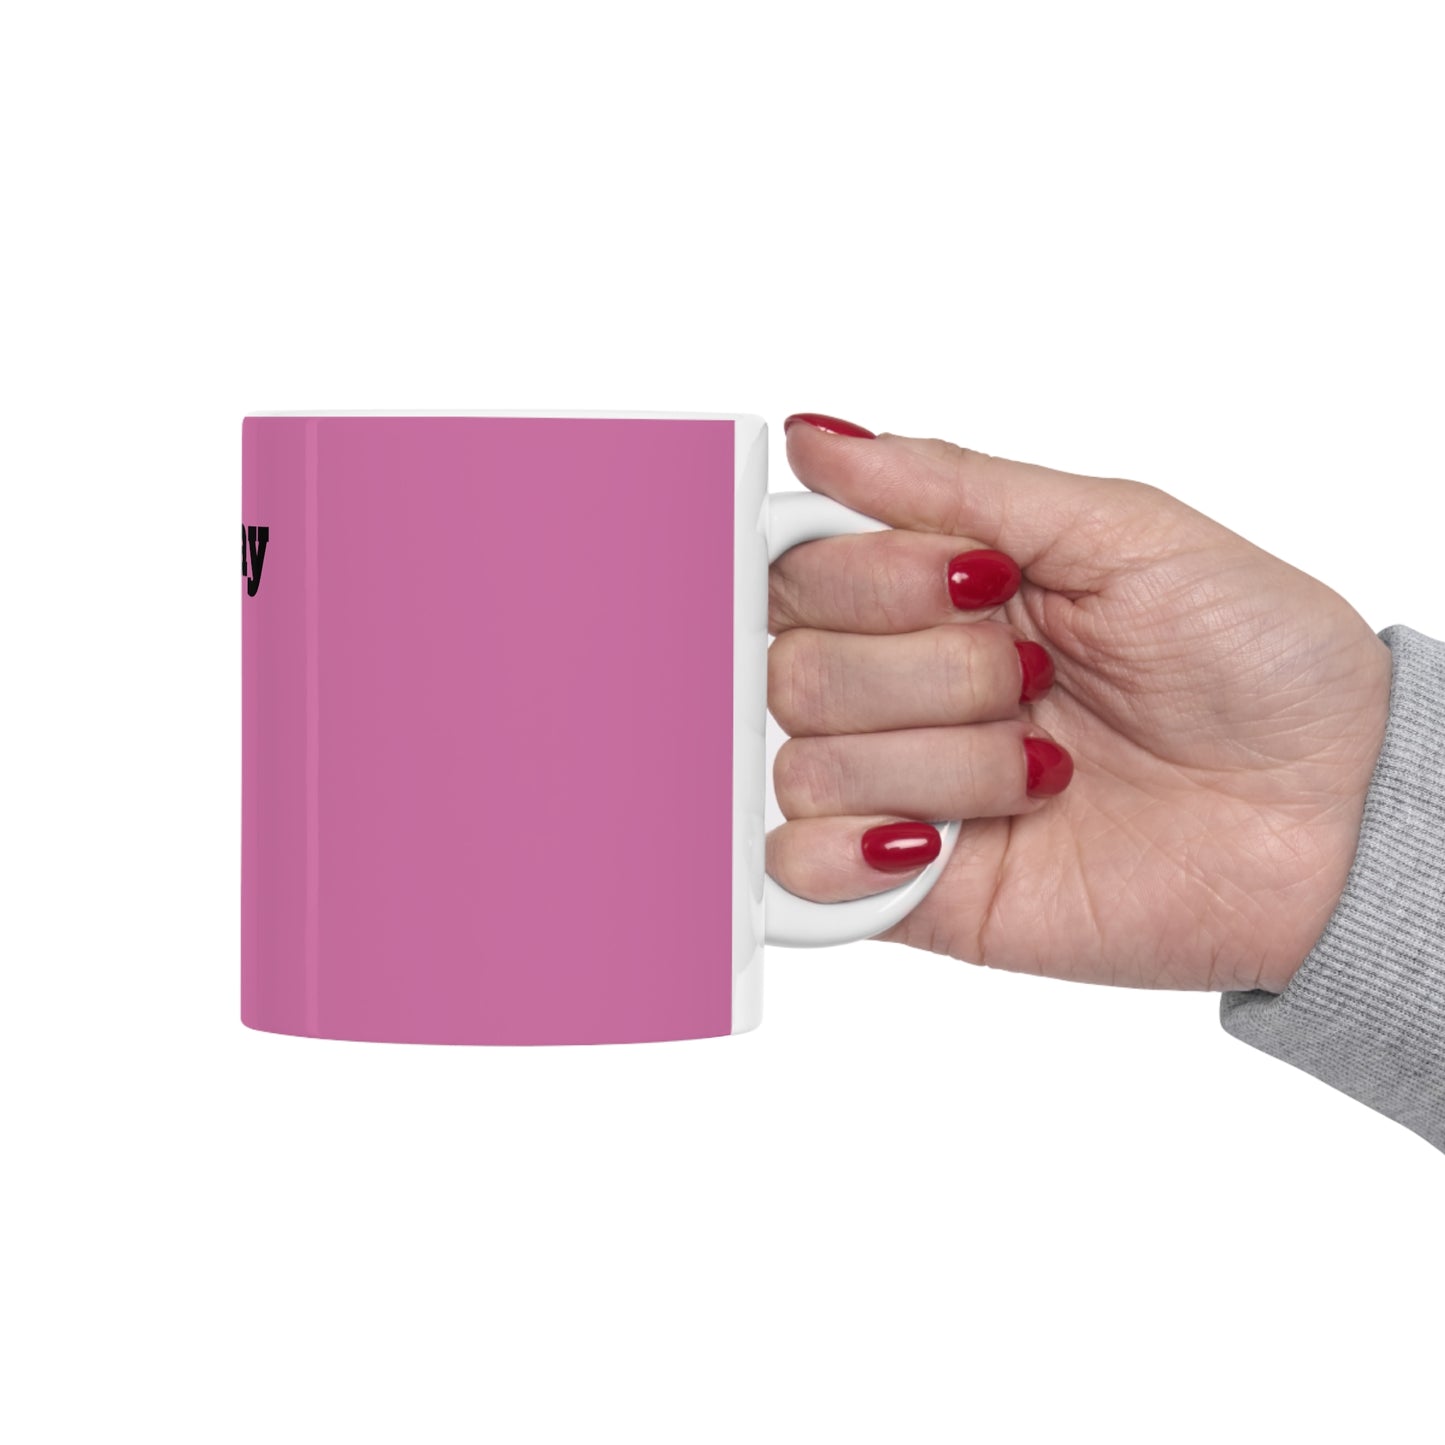 "NOW WHAT DAY YOU SAY TODAY IS? Pink Ceramic Mug 11oz